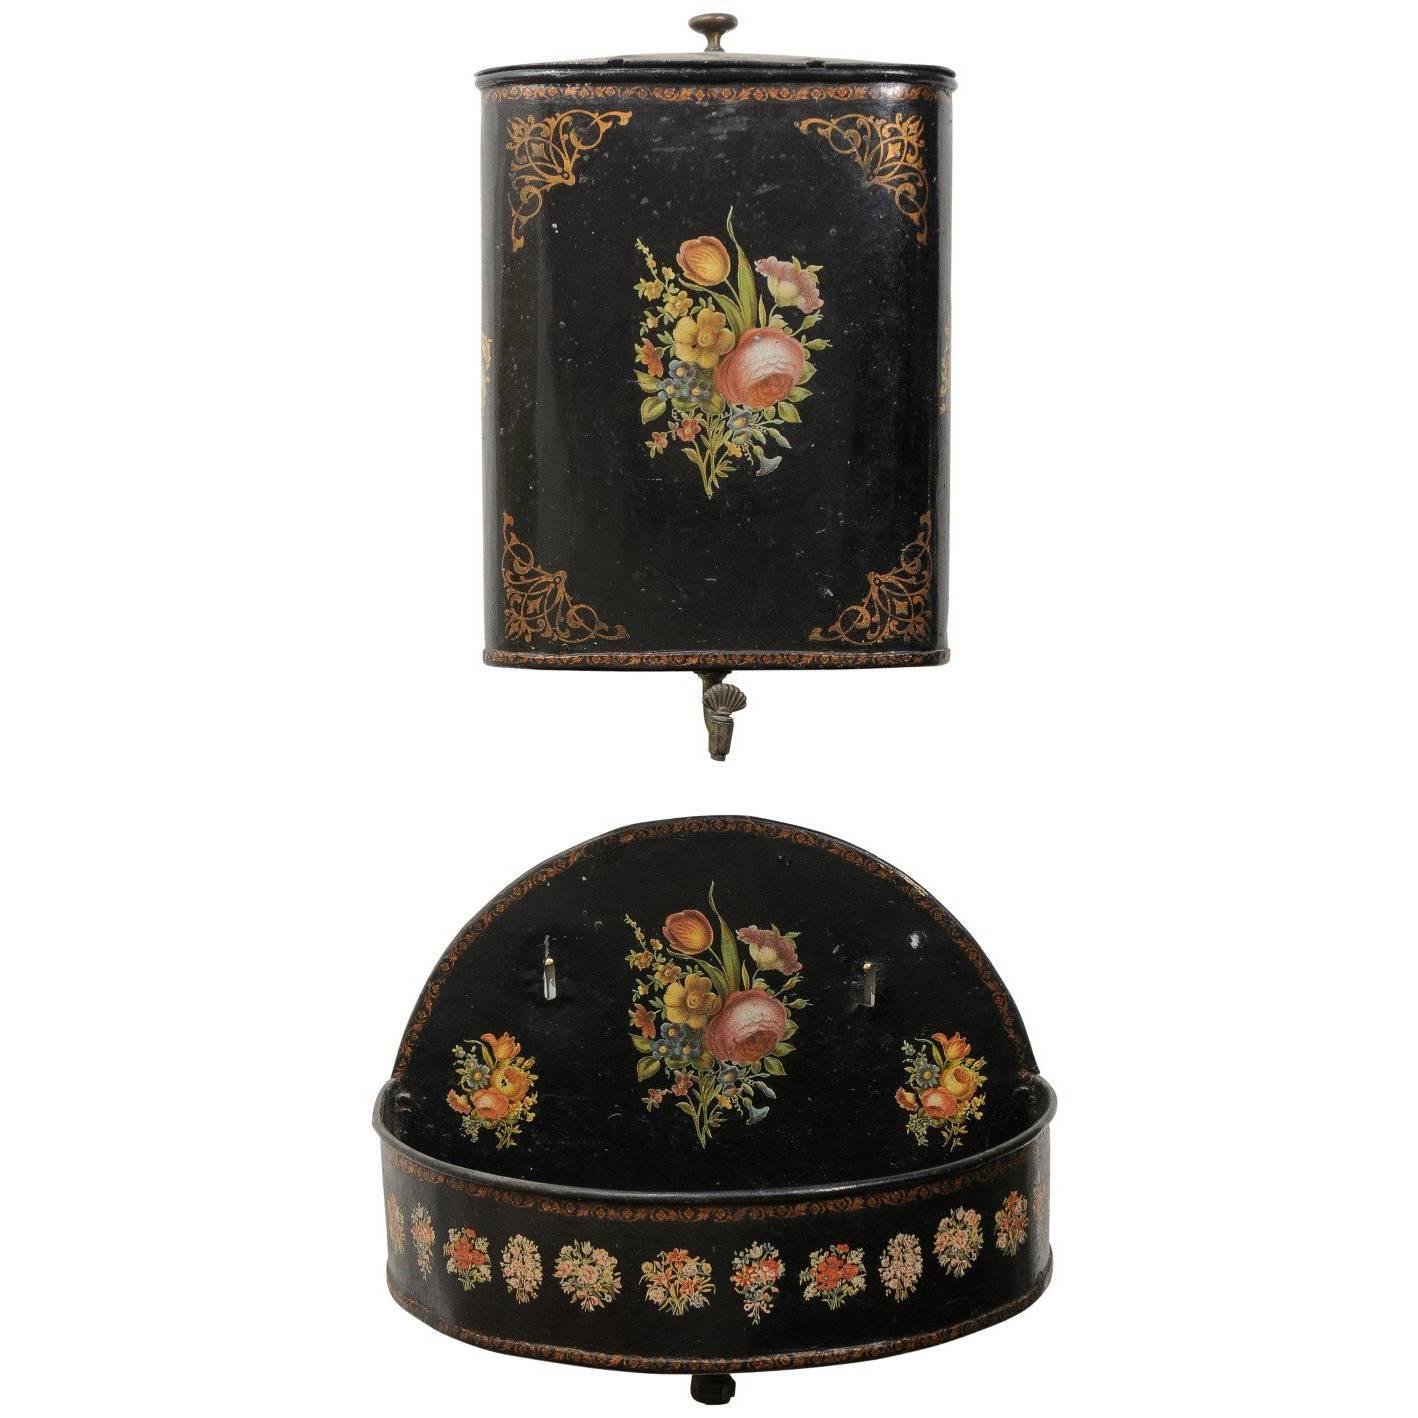 French Period Napoleon III Black Painted Tôle Lavabo with Floral Décor, 1870s For Sale